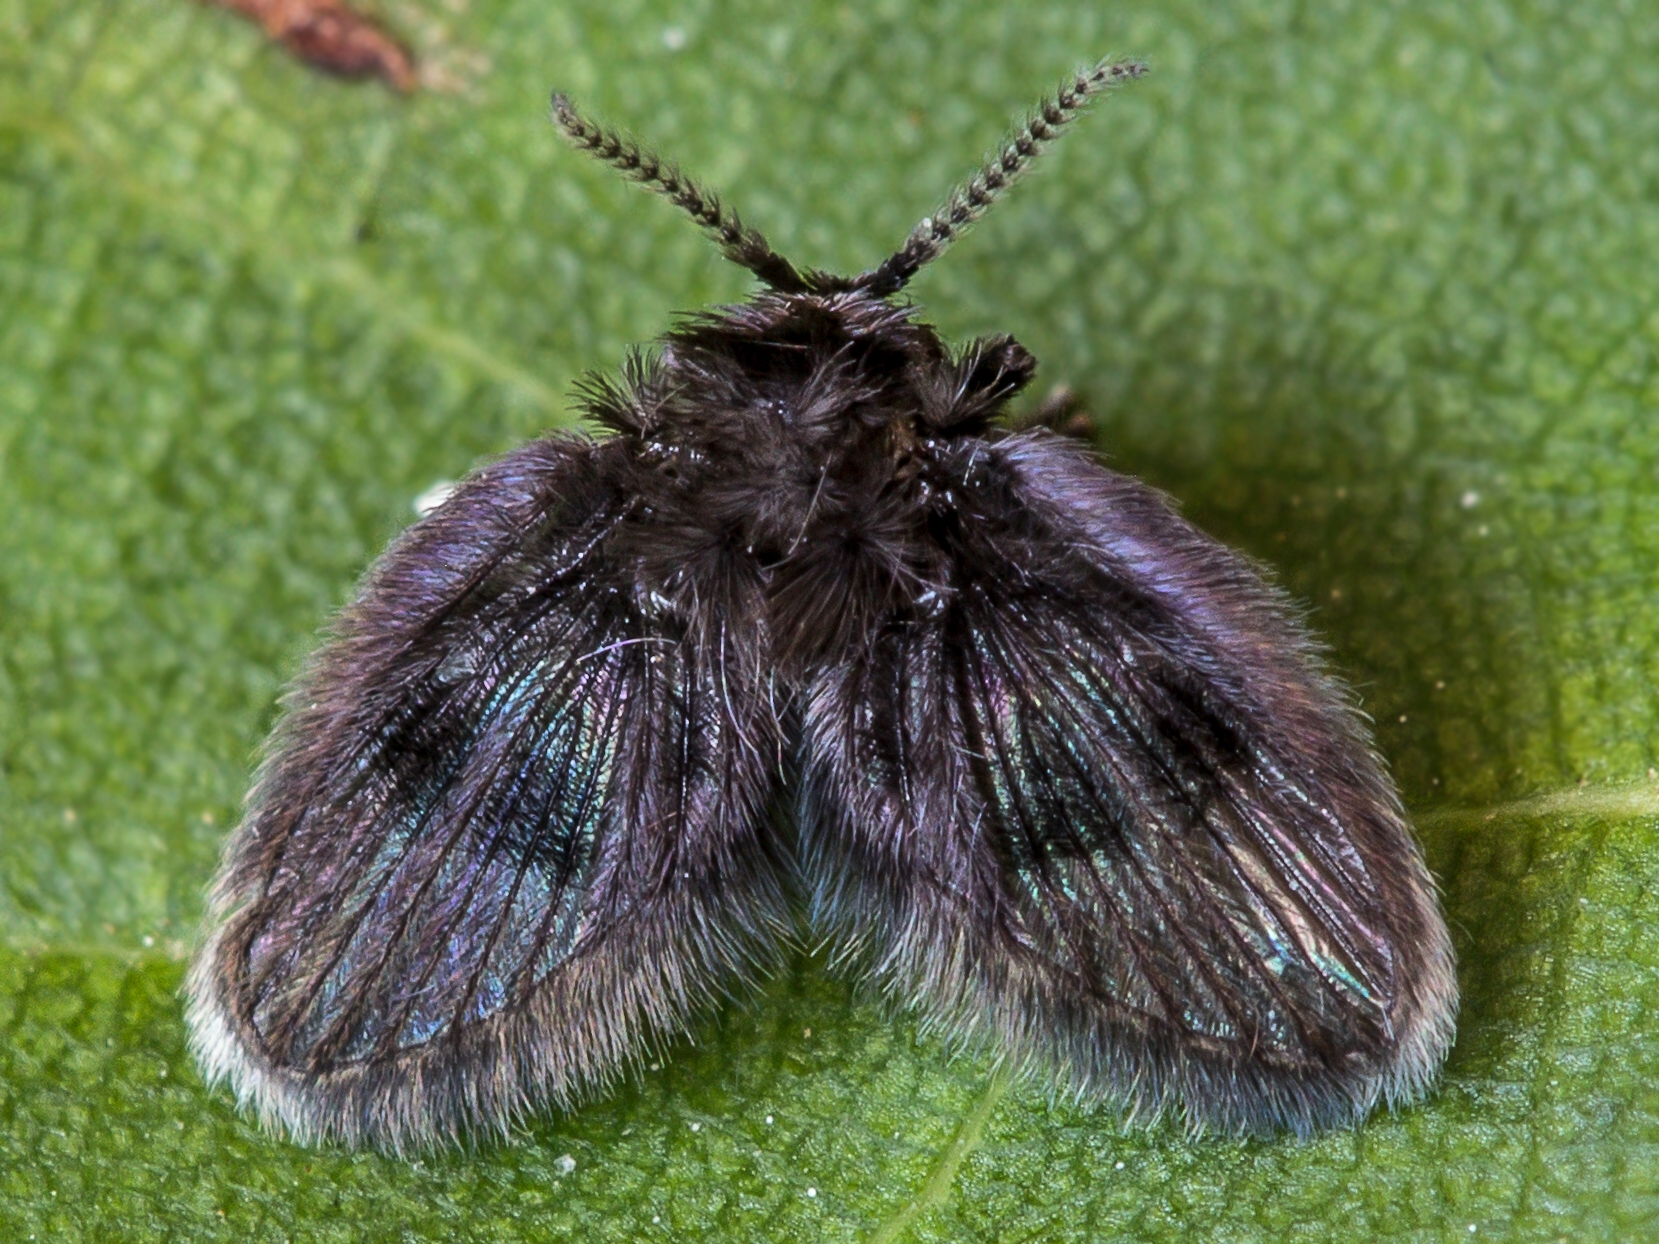 Undetermined representative of the Psychodidae family (photo by: Rudolf Cáfal)